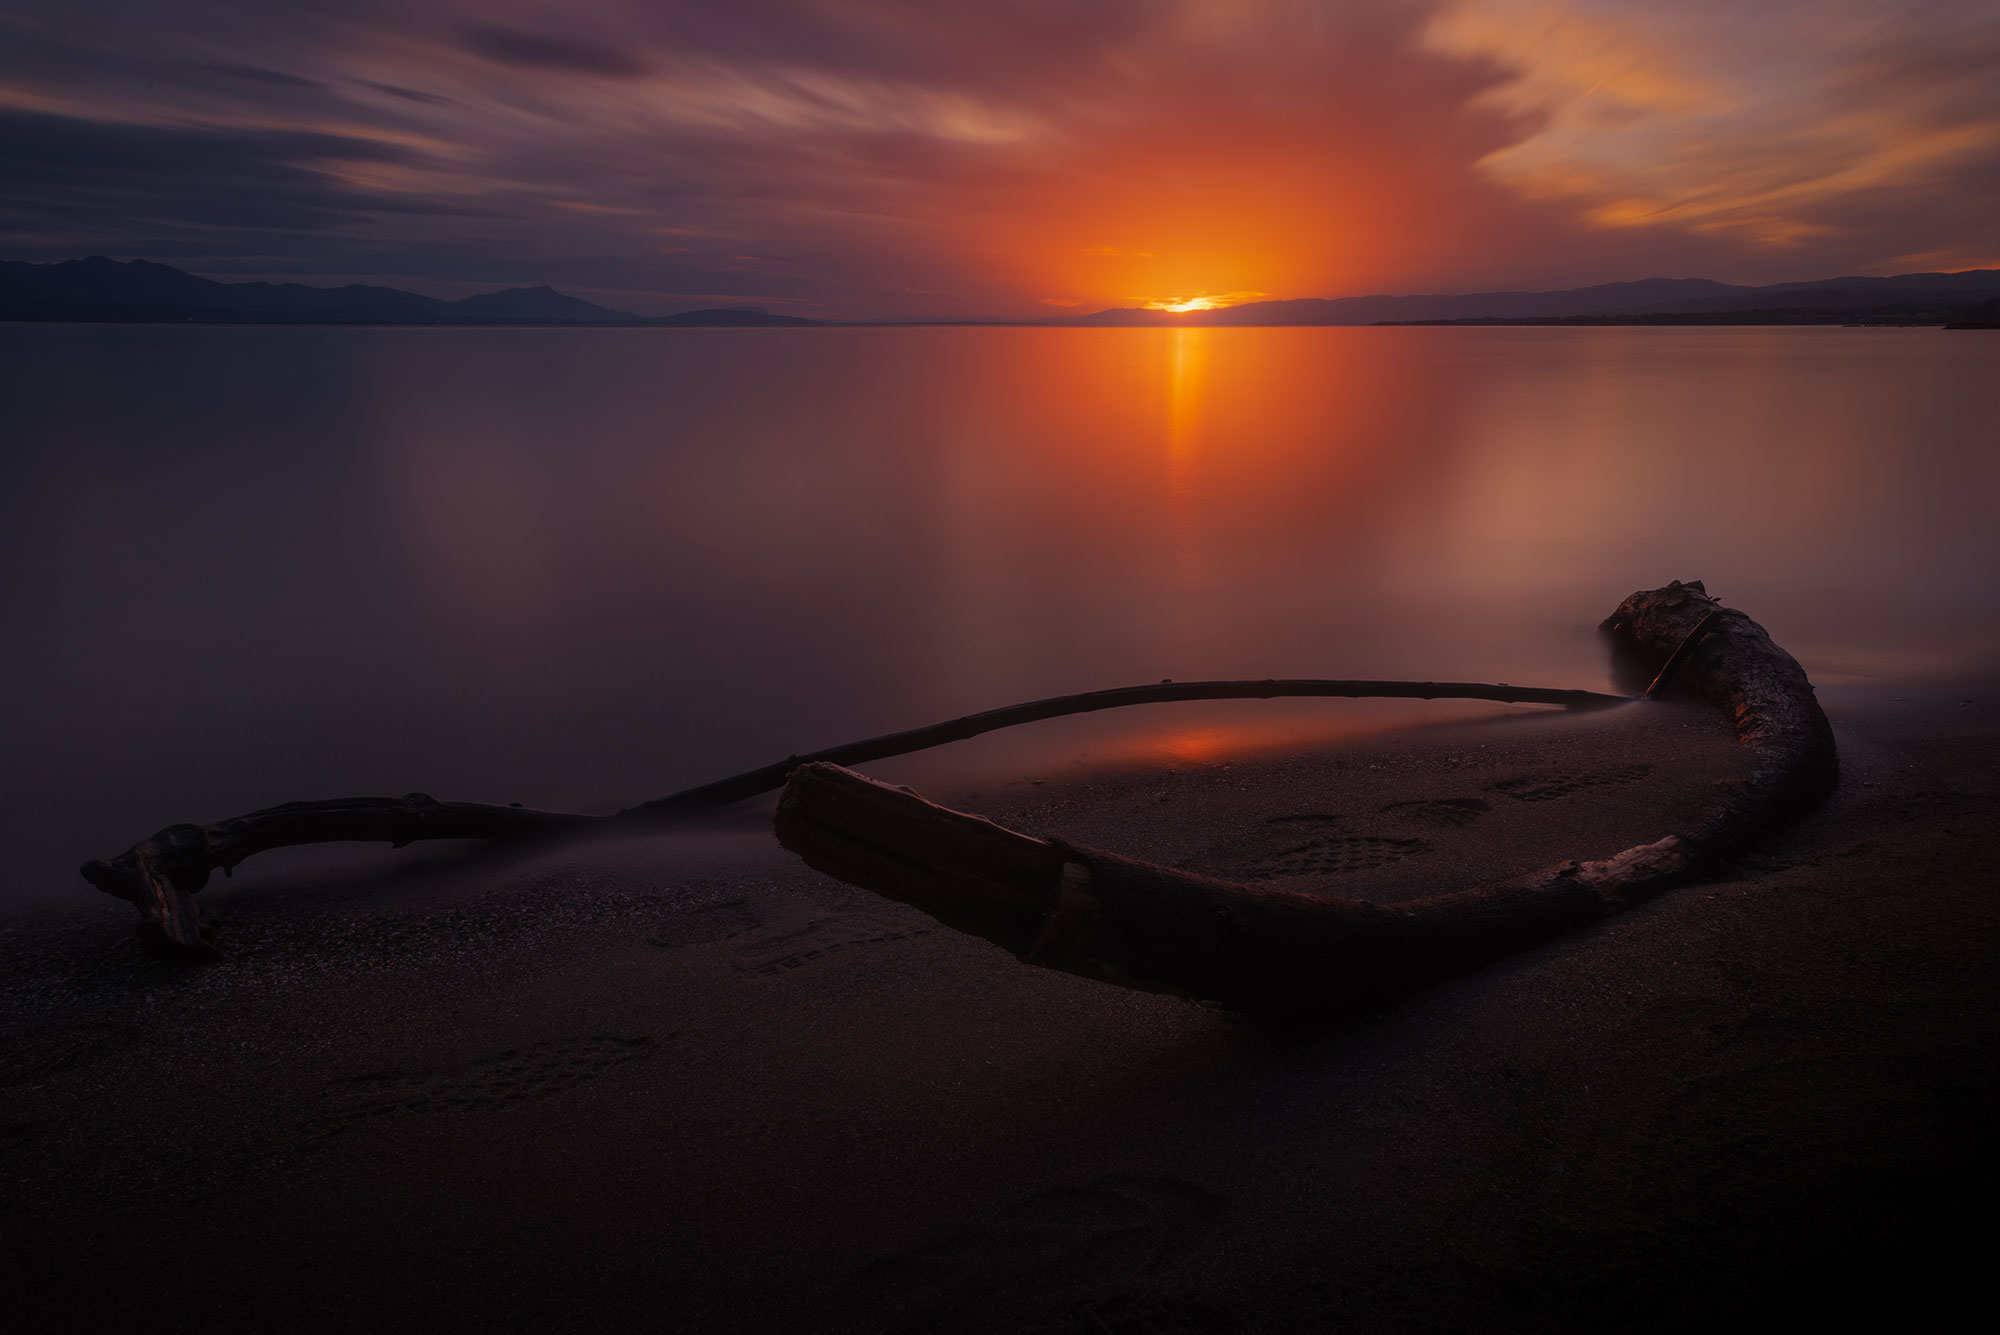 Embark on a visual journey through the lens of landscape photographer Jennifer Esseiva as she skillfully captures the breathtaking beauty of a long exposure dramatic sunset over Lake Geneva in St. Sulpice, Canton of Vaud, Switzerland. The lake shore, adorned with weathered wood pieces on the sand, adds a rustic charm to the scene. Jennifer's photography transforms the sky into a canvas of vibrant hues, creating a stunning visual spectacle. Immerse yourself in the dynamic allure of this Swiss sunset, expertly captured to evoke a sense of awe and wonder.